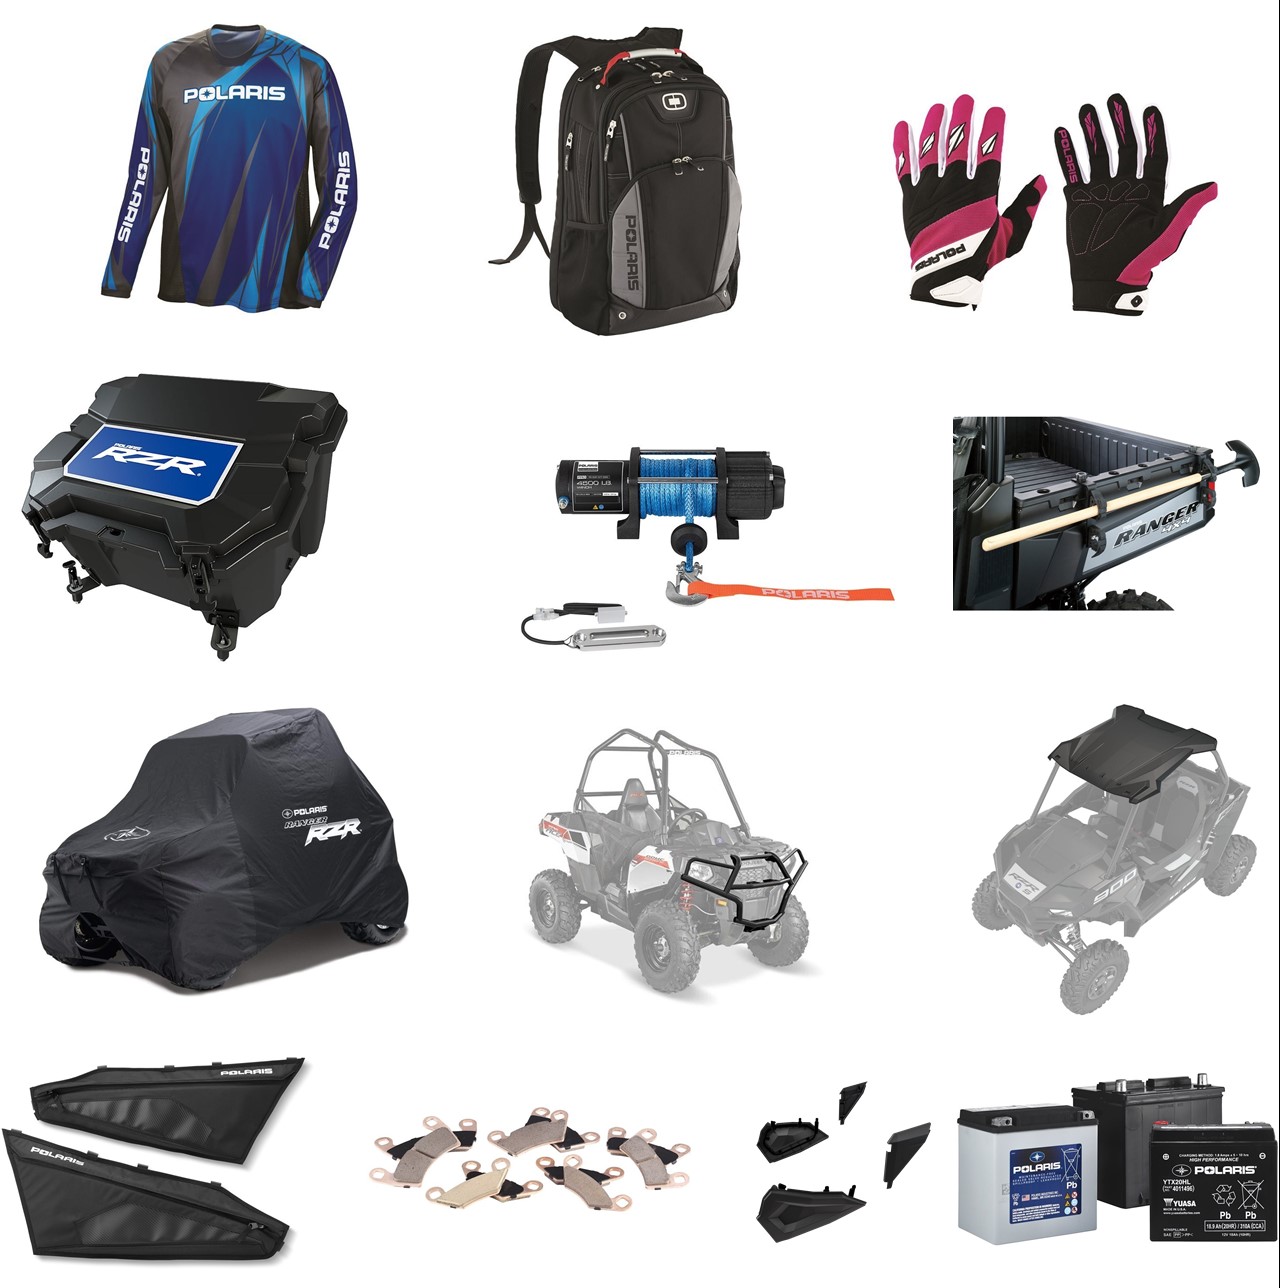 41-accessories---main-page.jpg